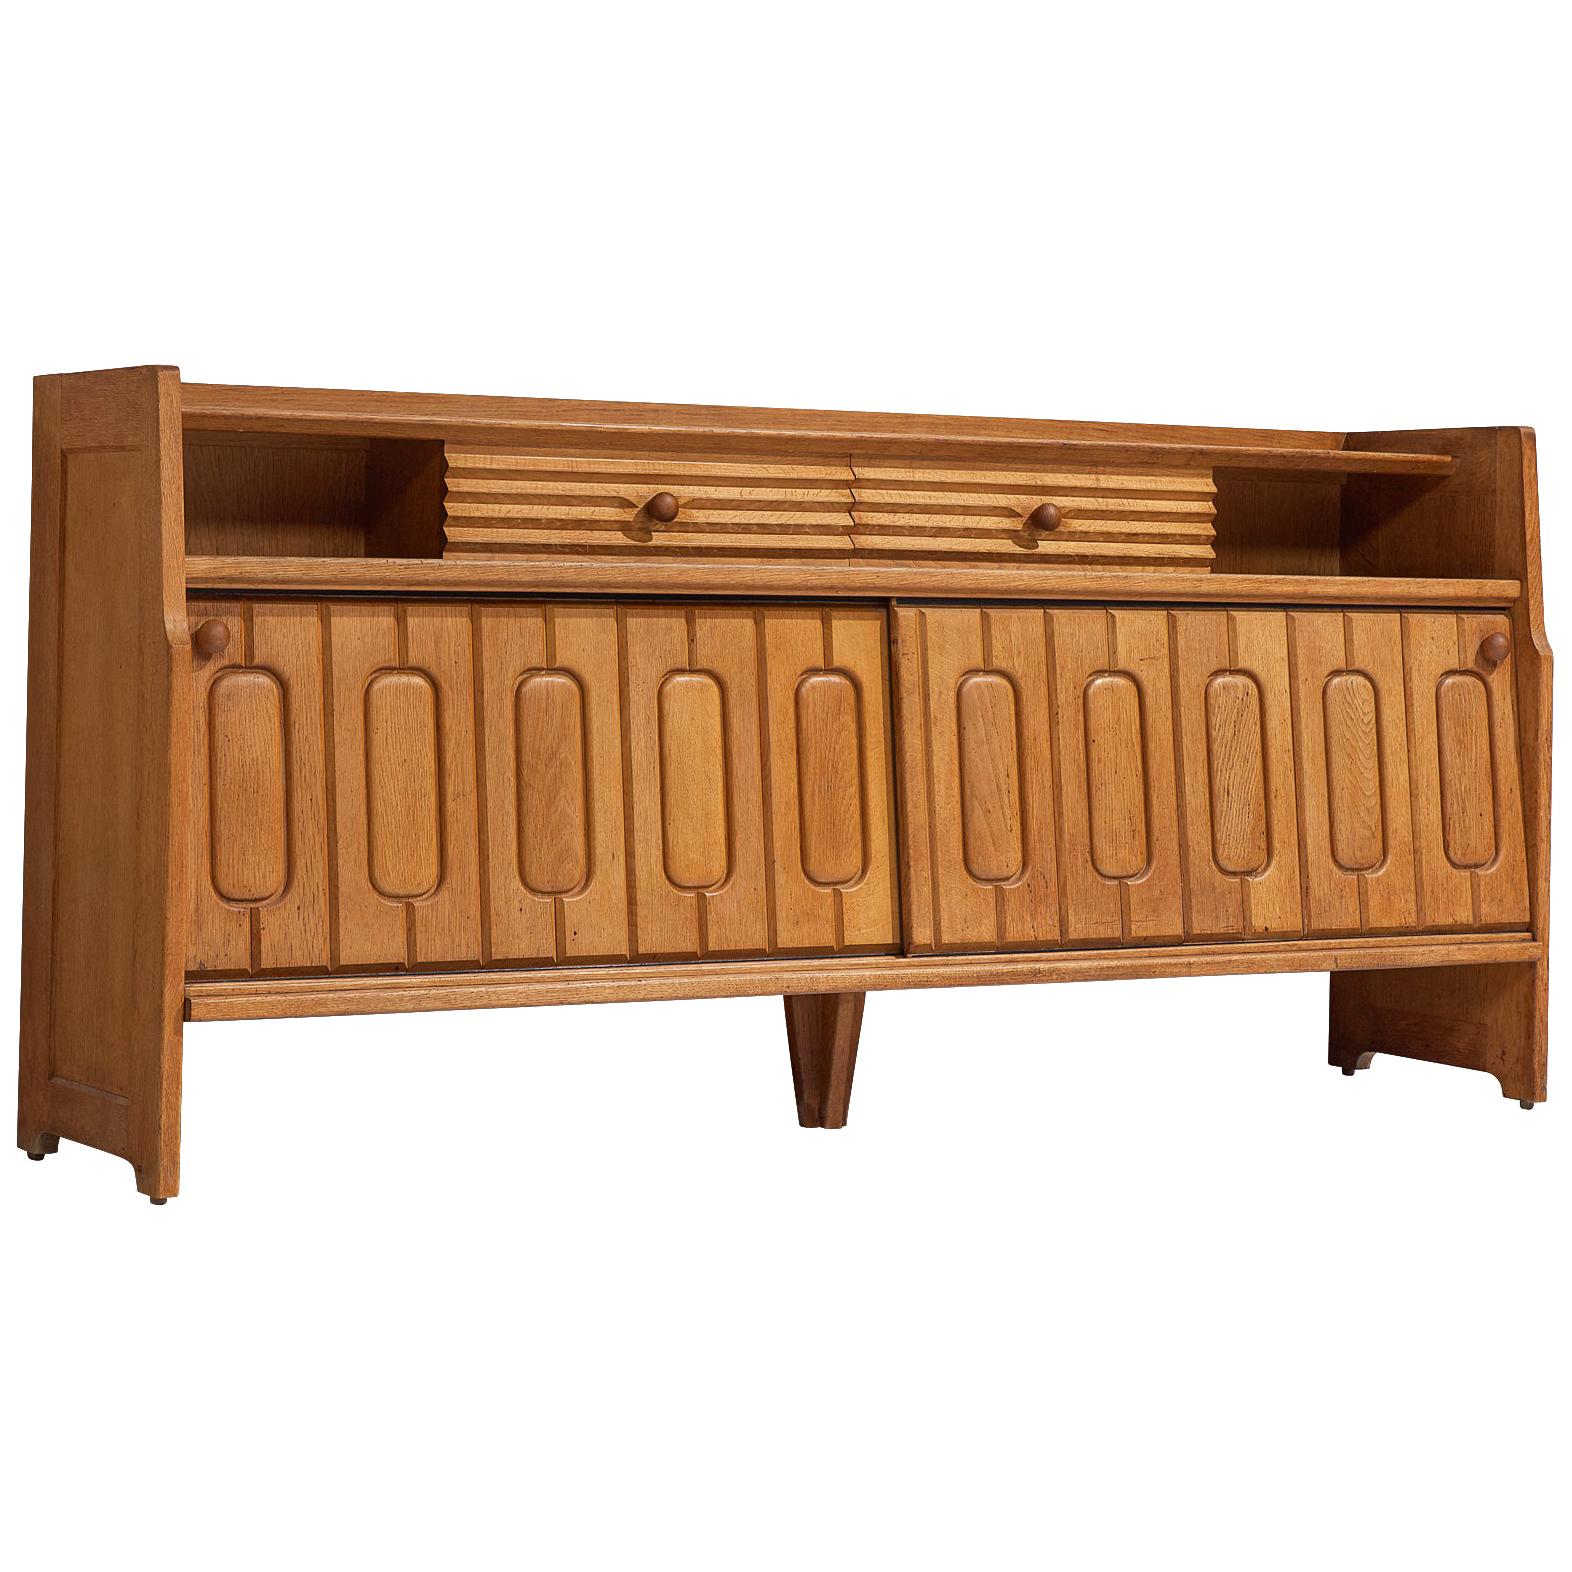 Guillerme & Chambron Sideboard in Oak and Ceramics